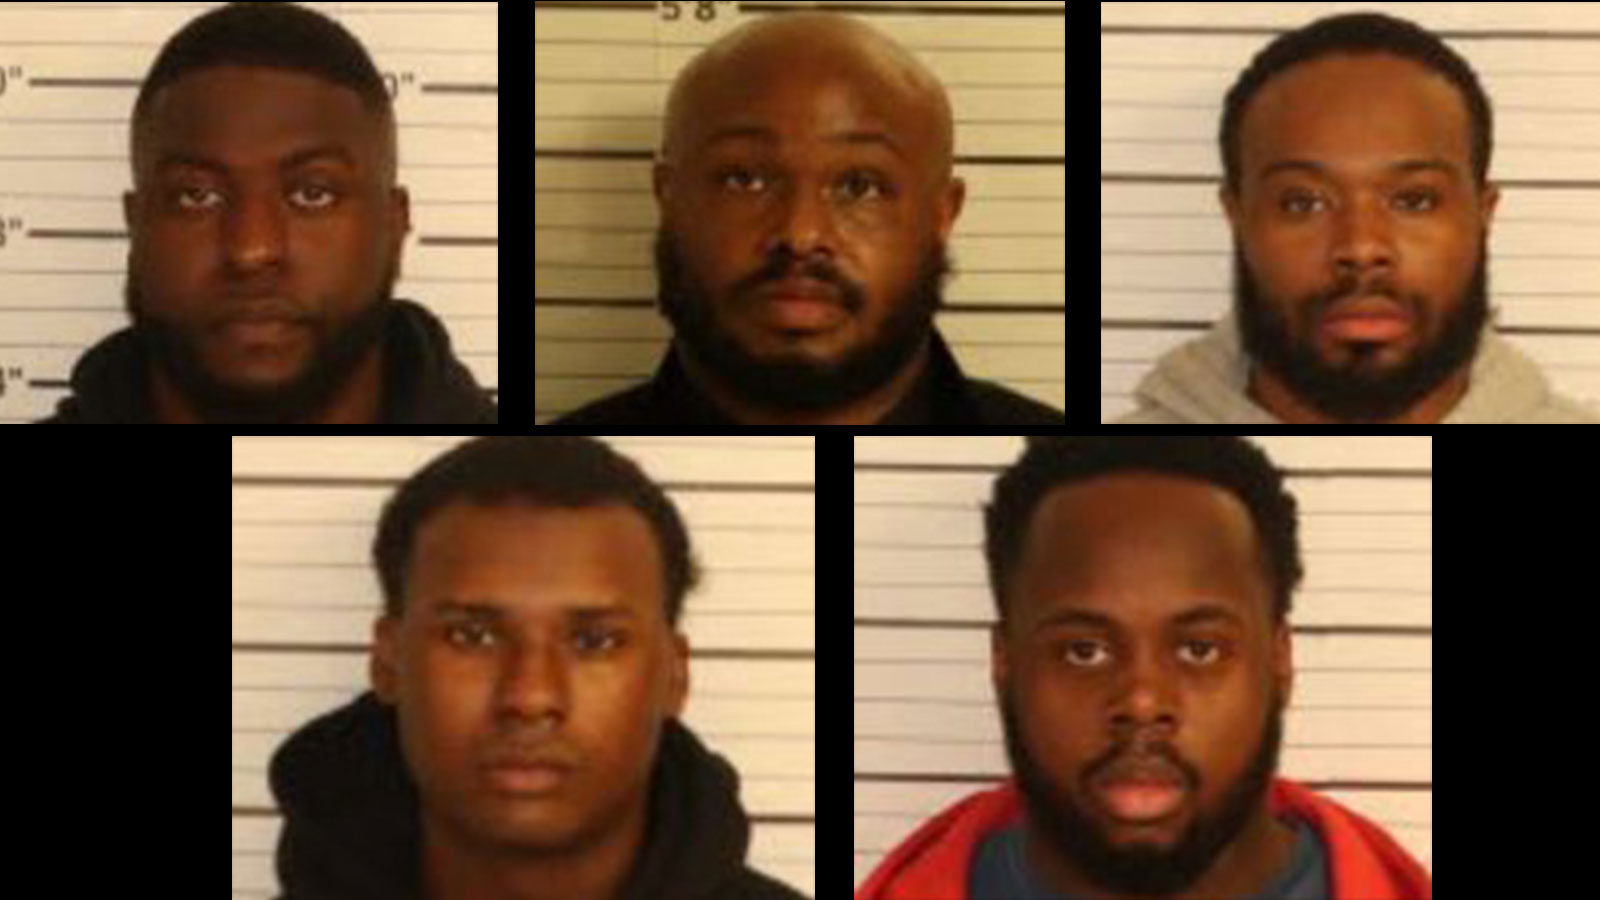 5 former Memphis police officers will be charged with second-degree murder in Tyre Nichols’ death